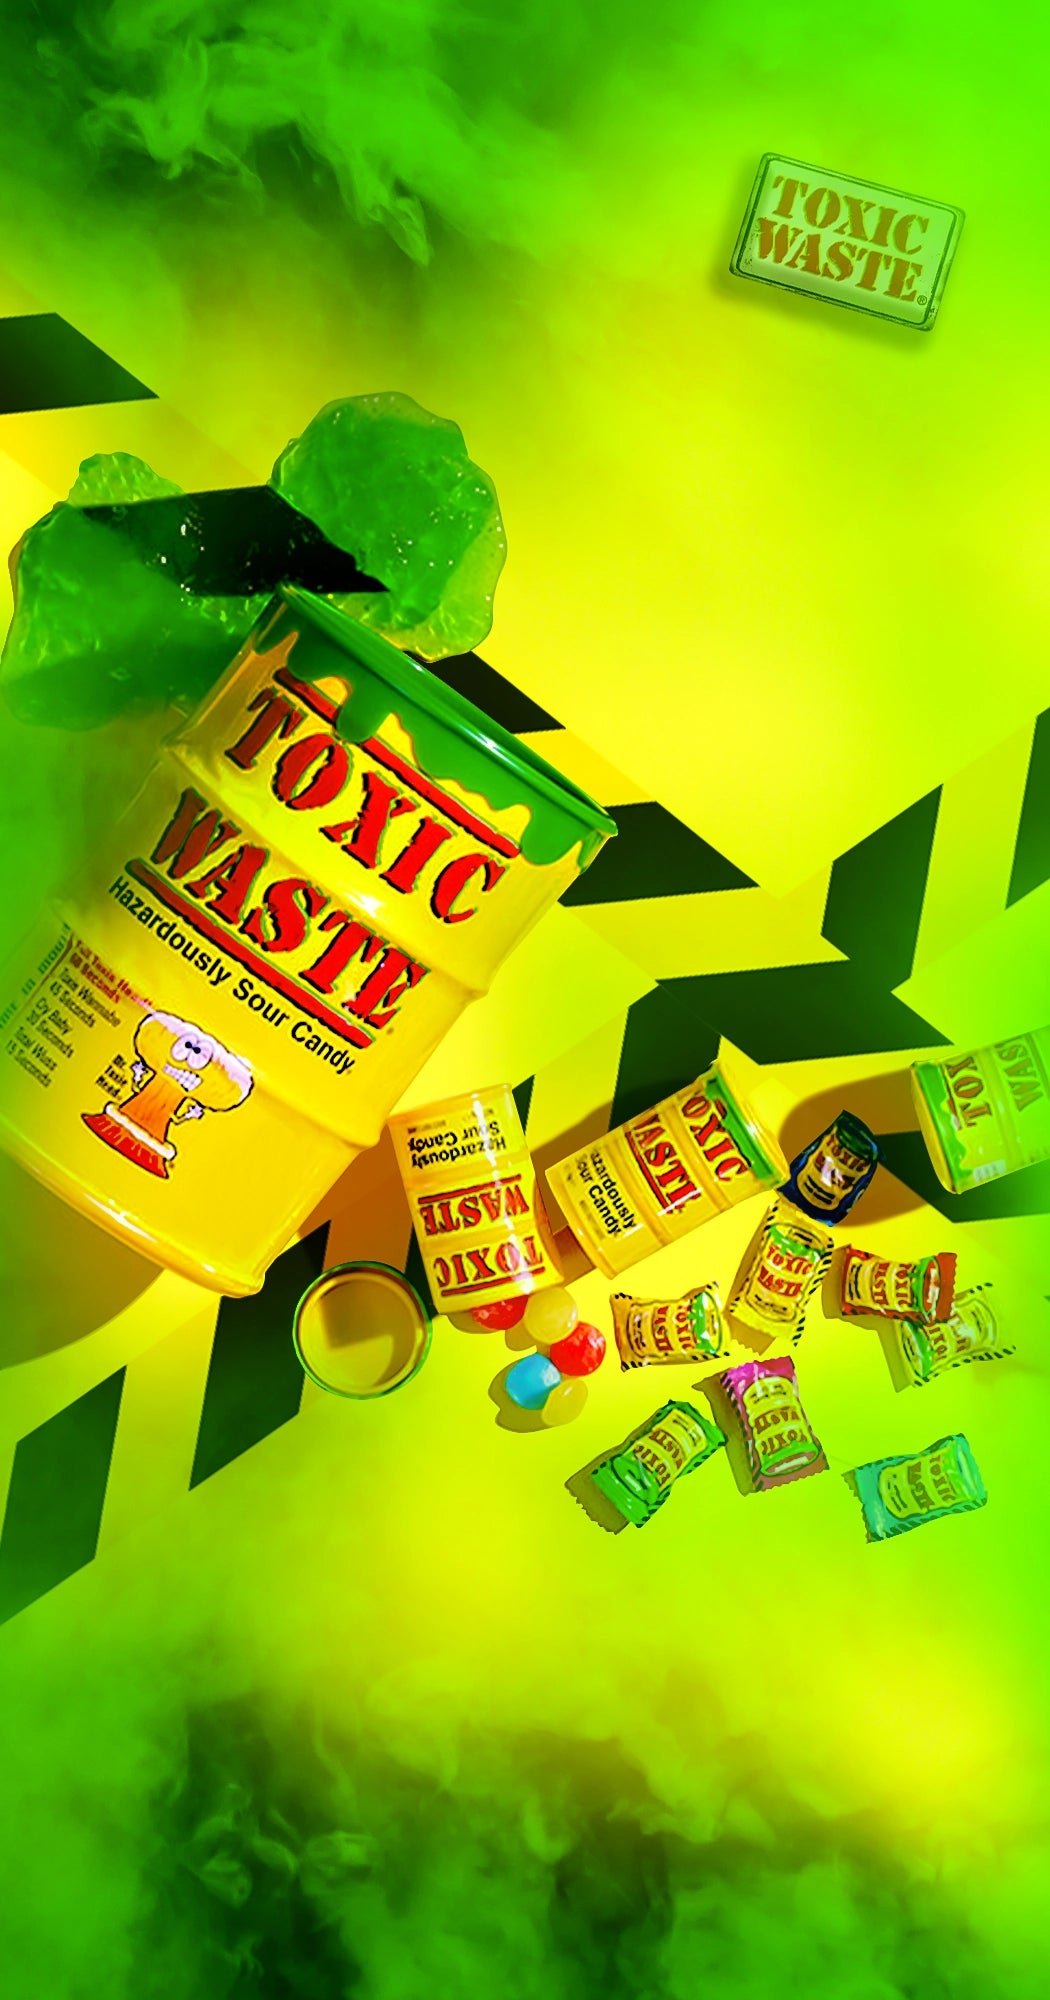 Toxic-Waste-Banner